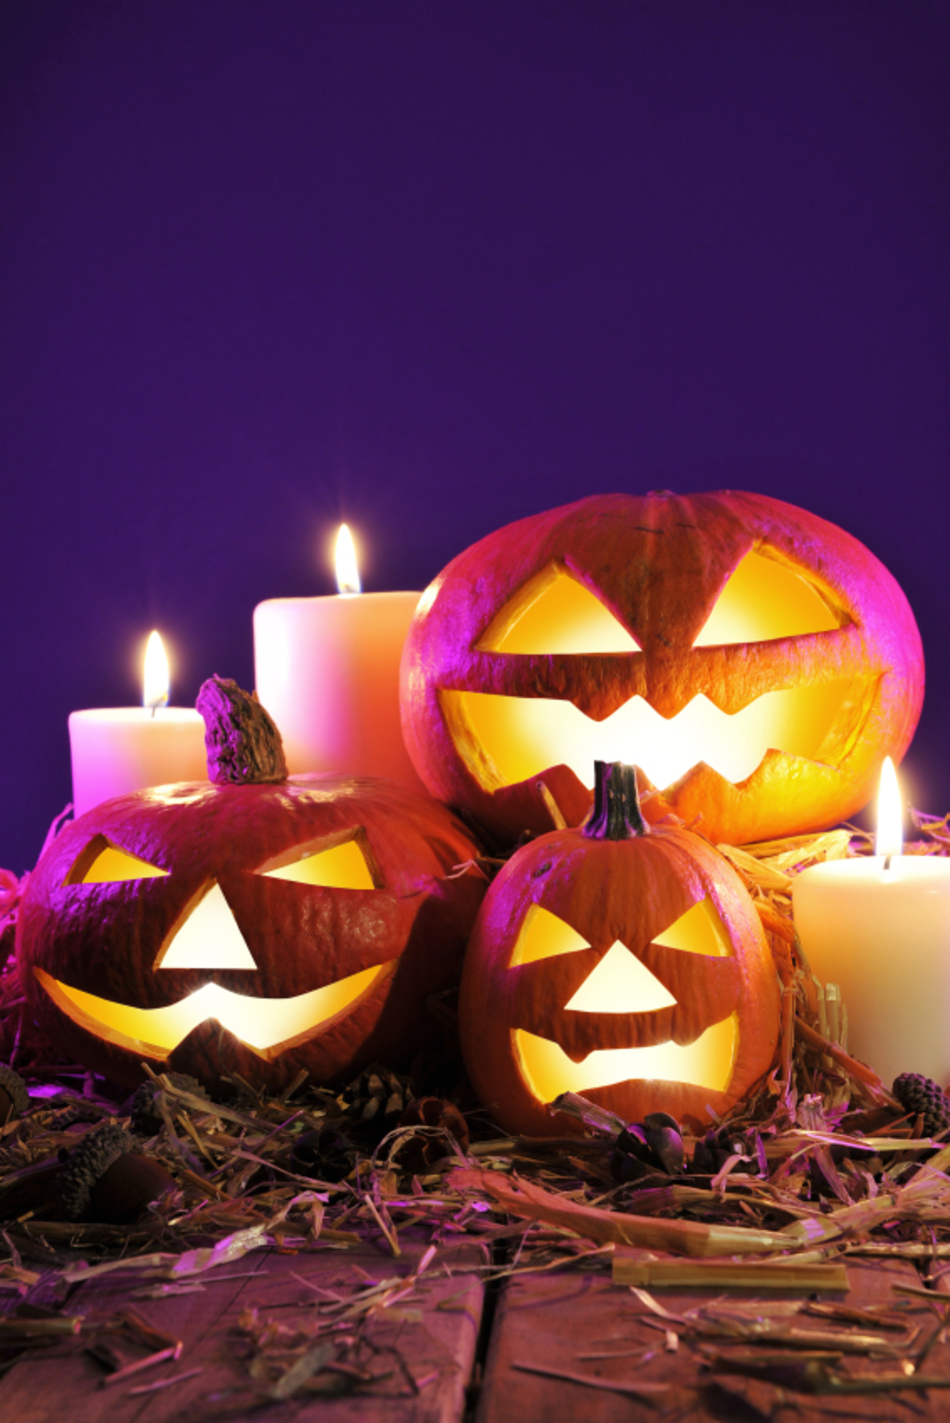 Three Fire Dangers to Watch Out for this Halloween